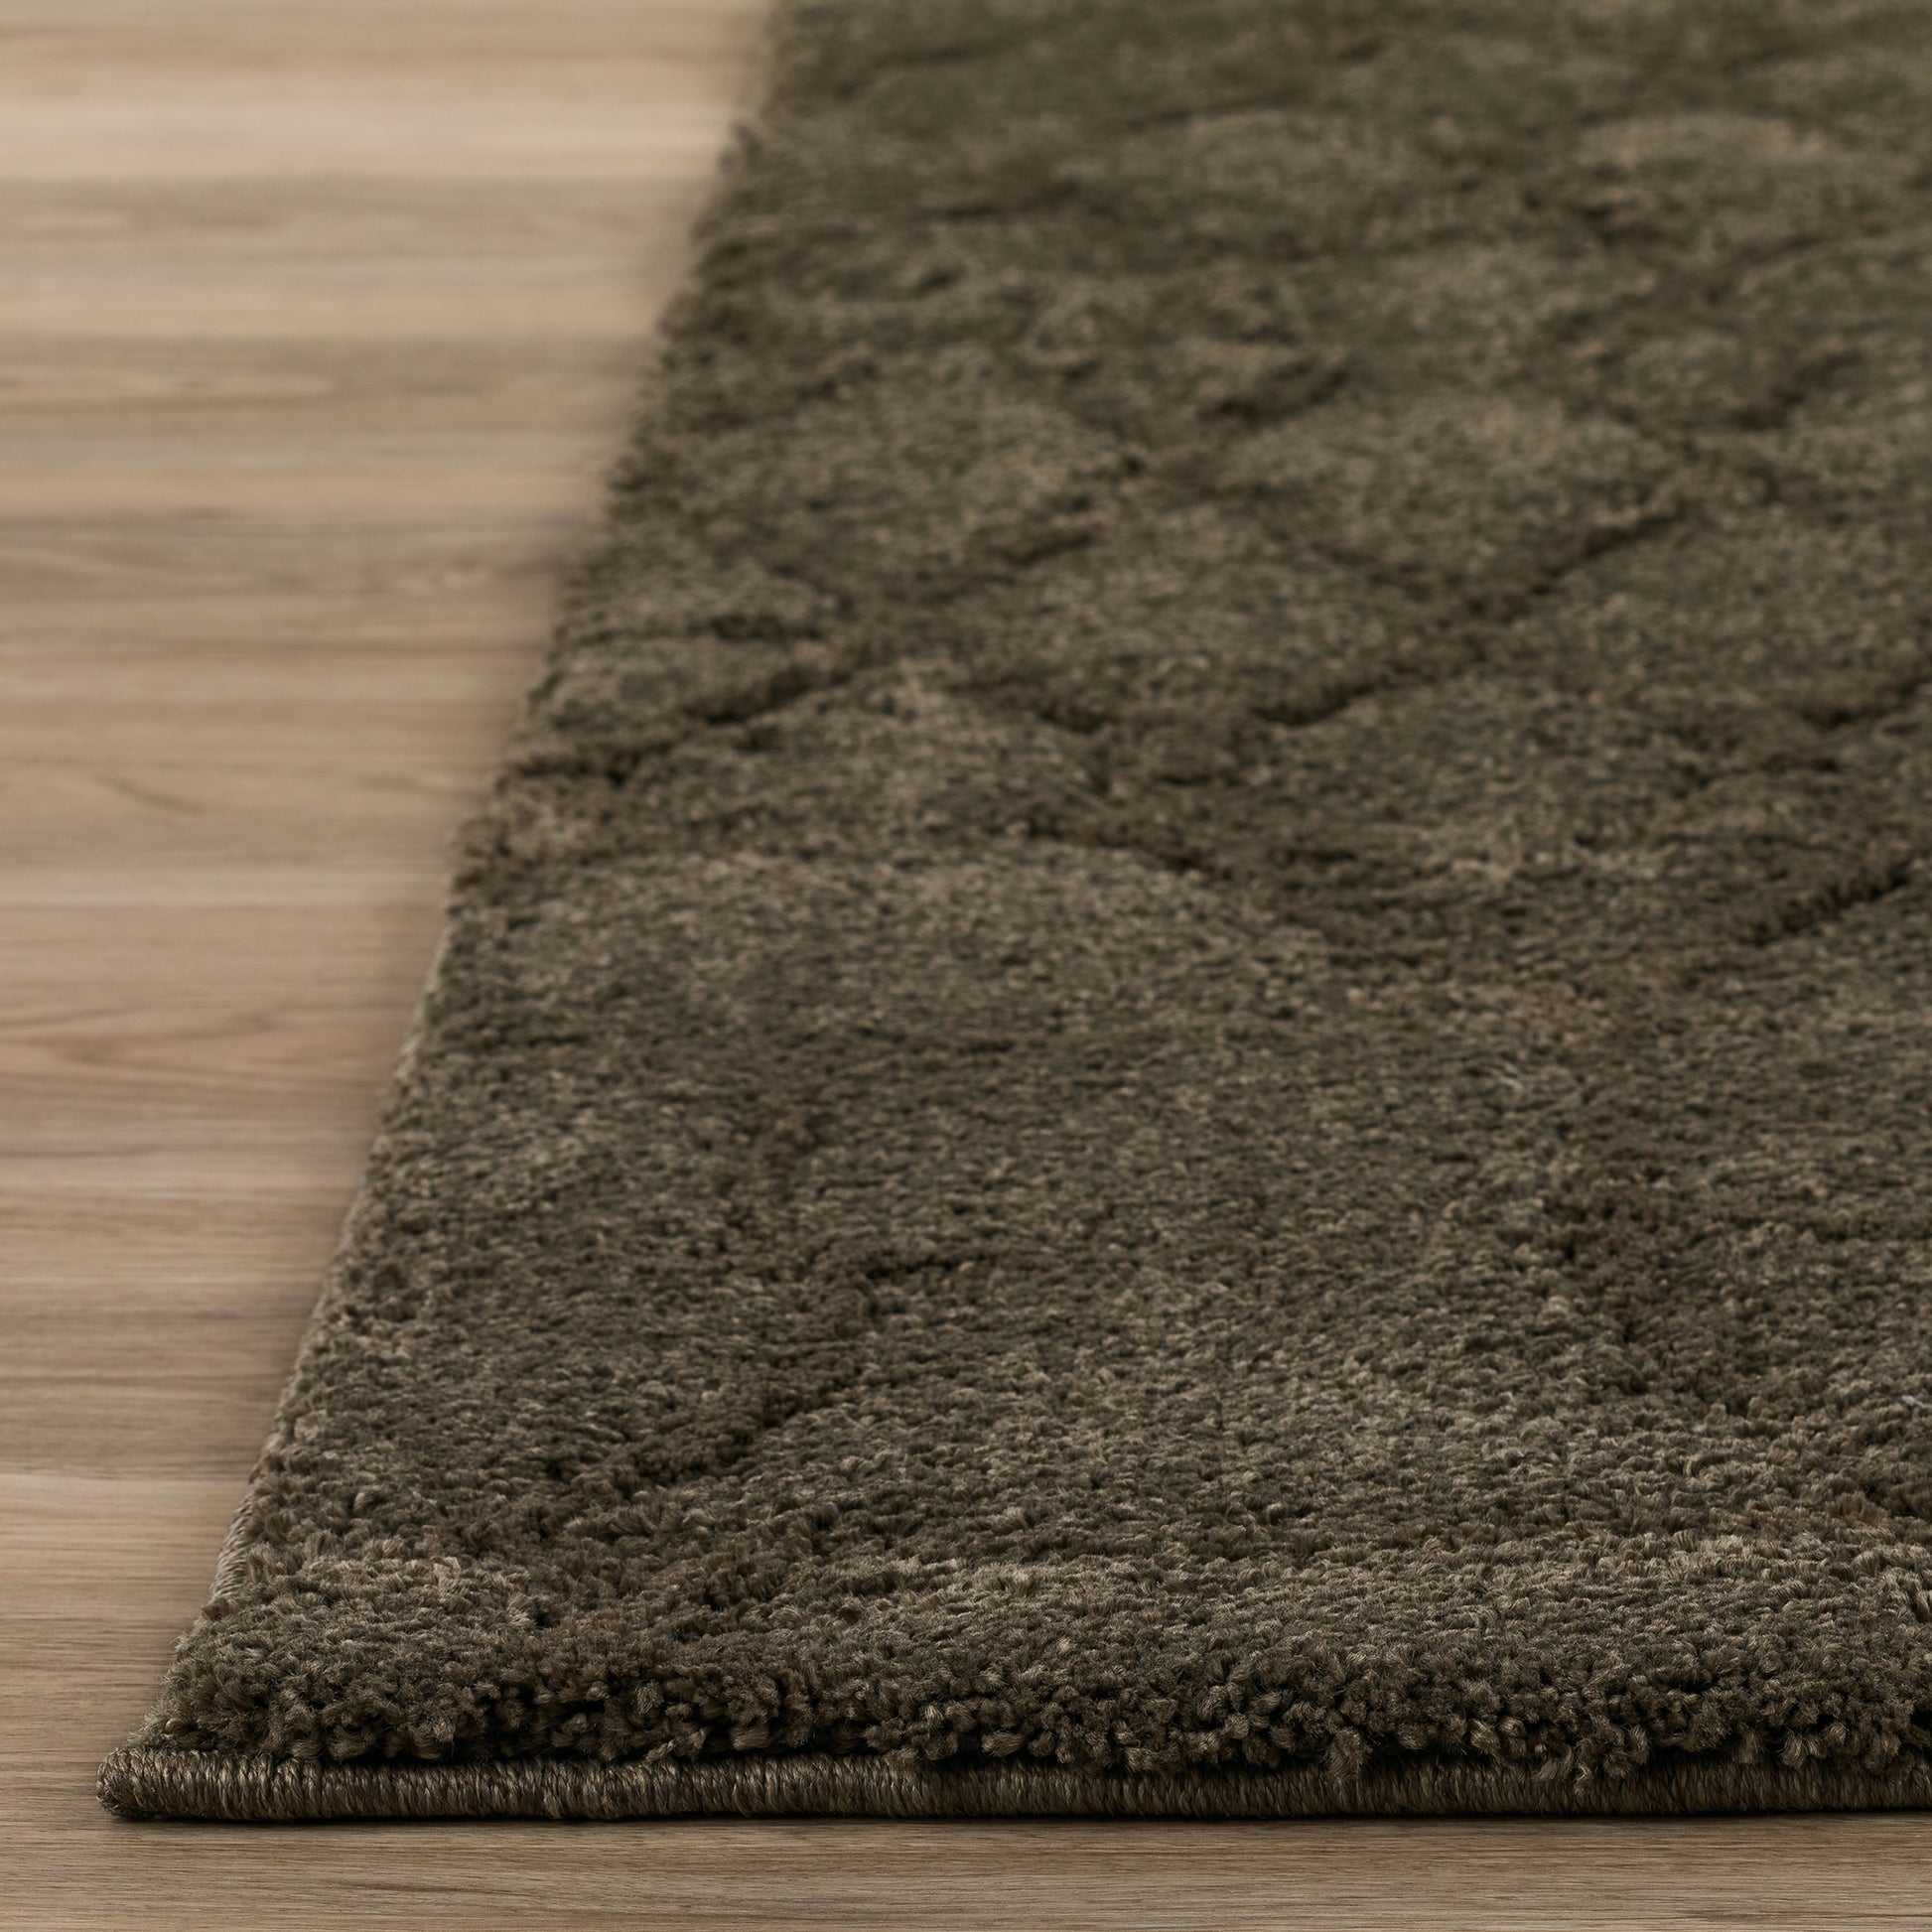 Dalyn Marquee Mq1 Taupe Area Rug